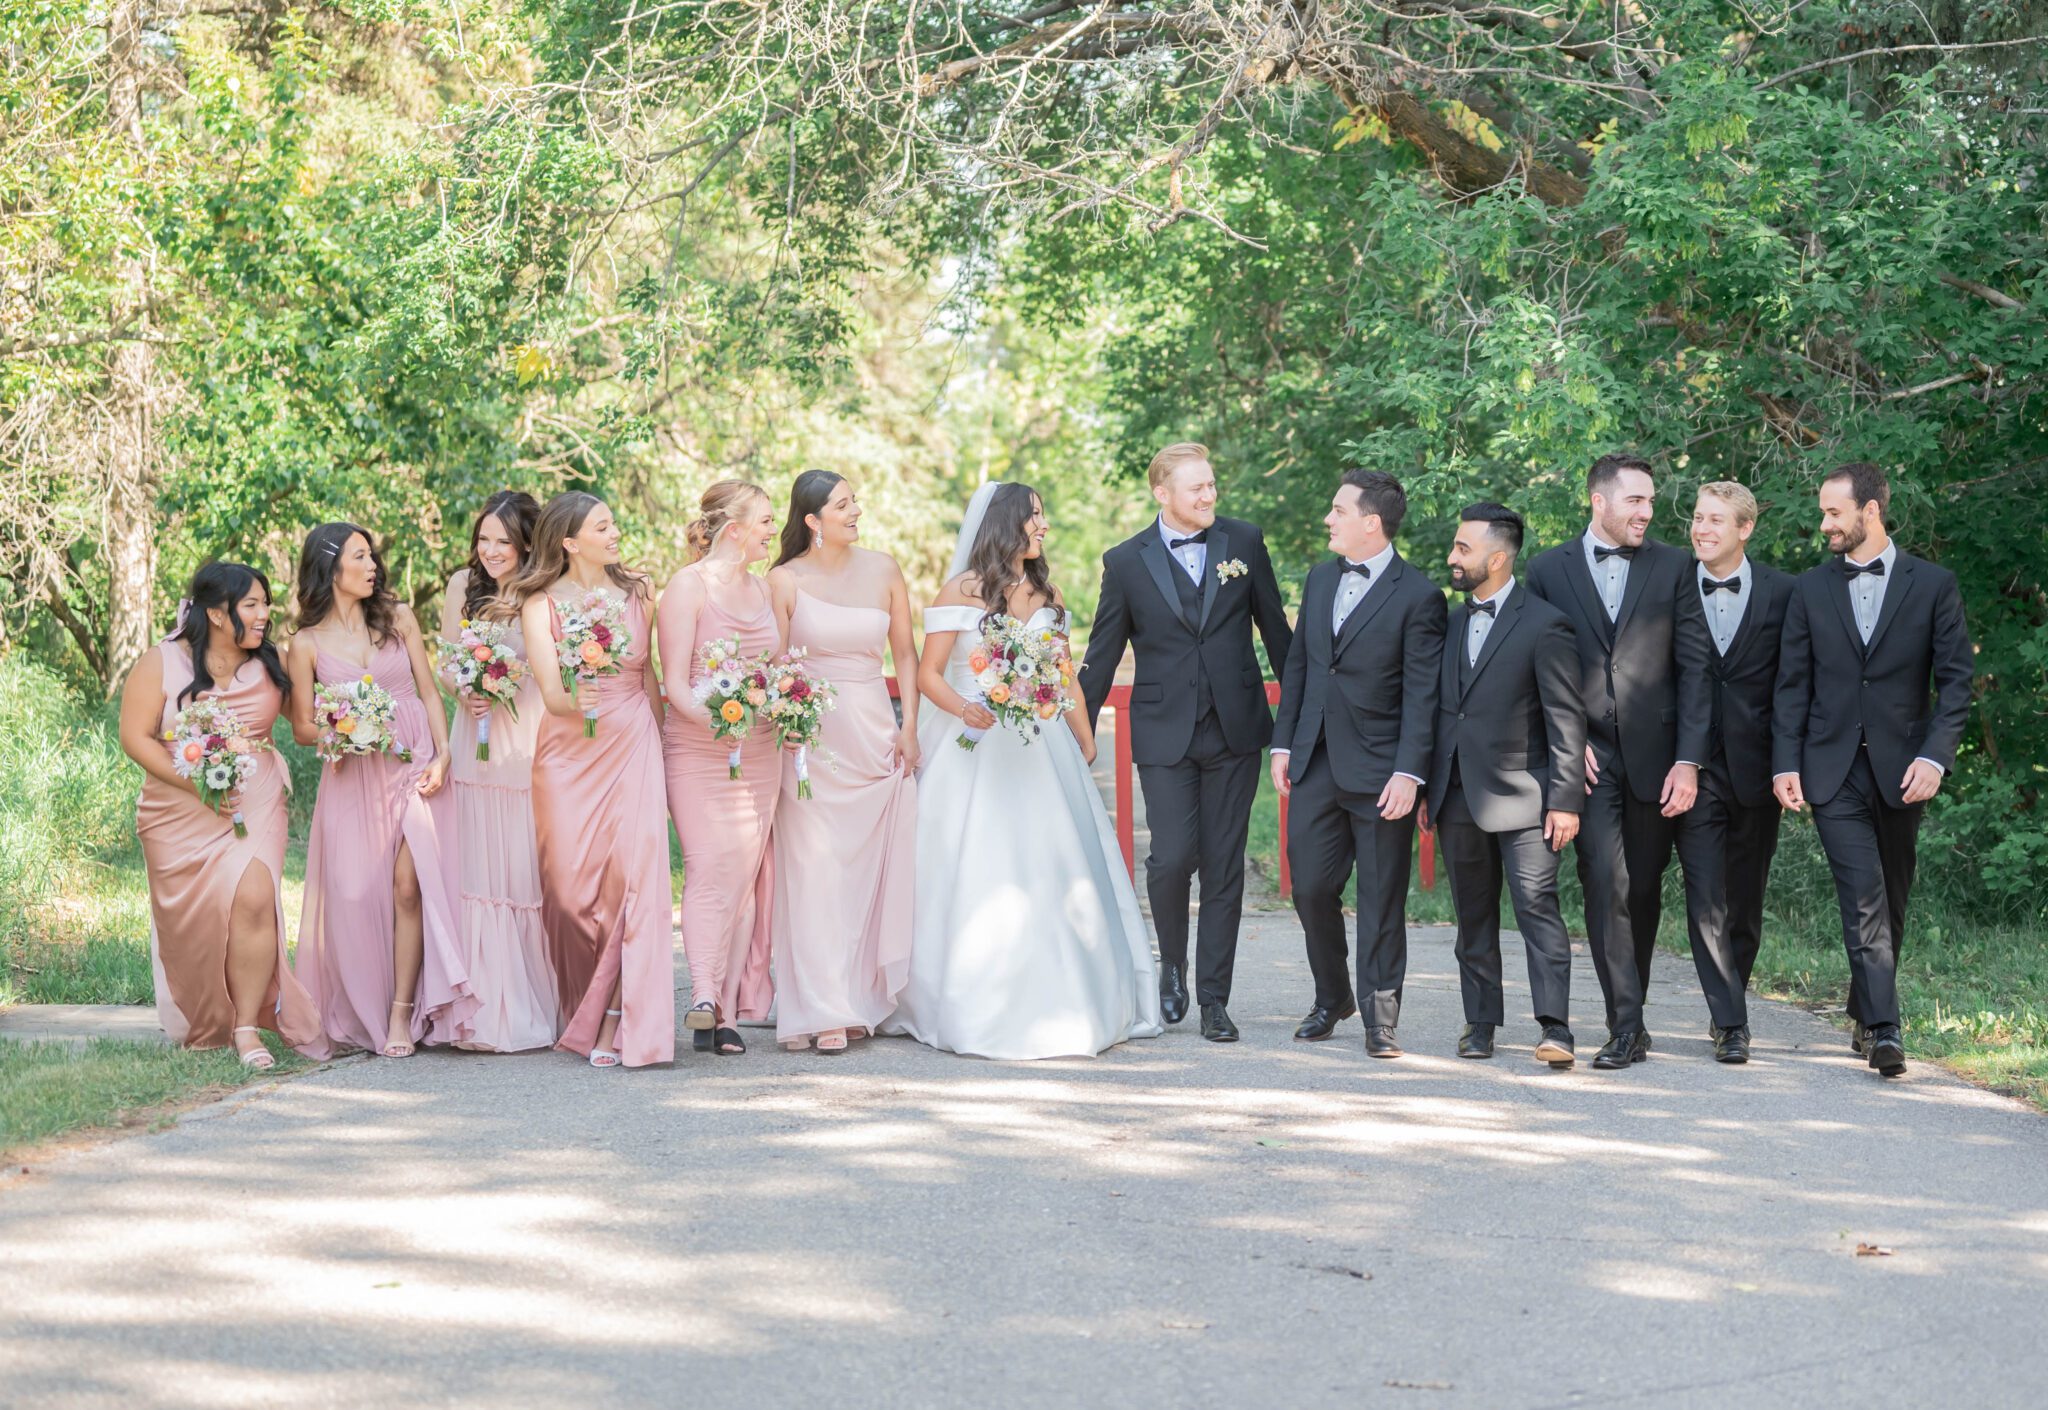 Wide portrait of bride and groom walking with their wedding party in Spruce Meadows, bridesmaids in different shades of pink.